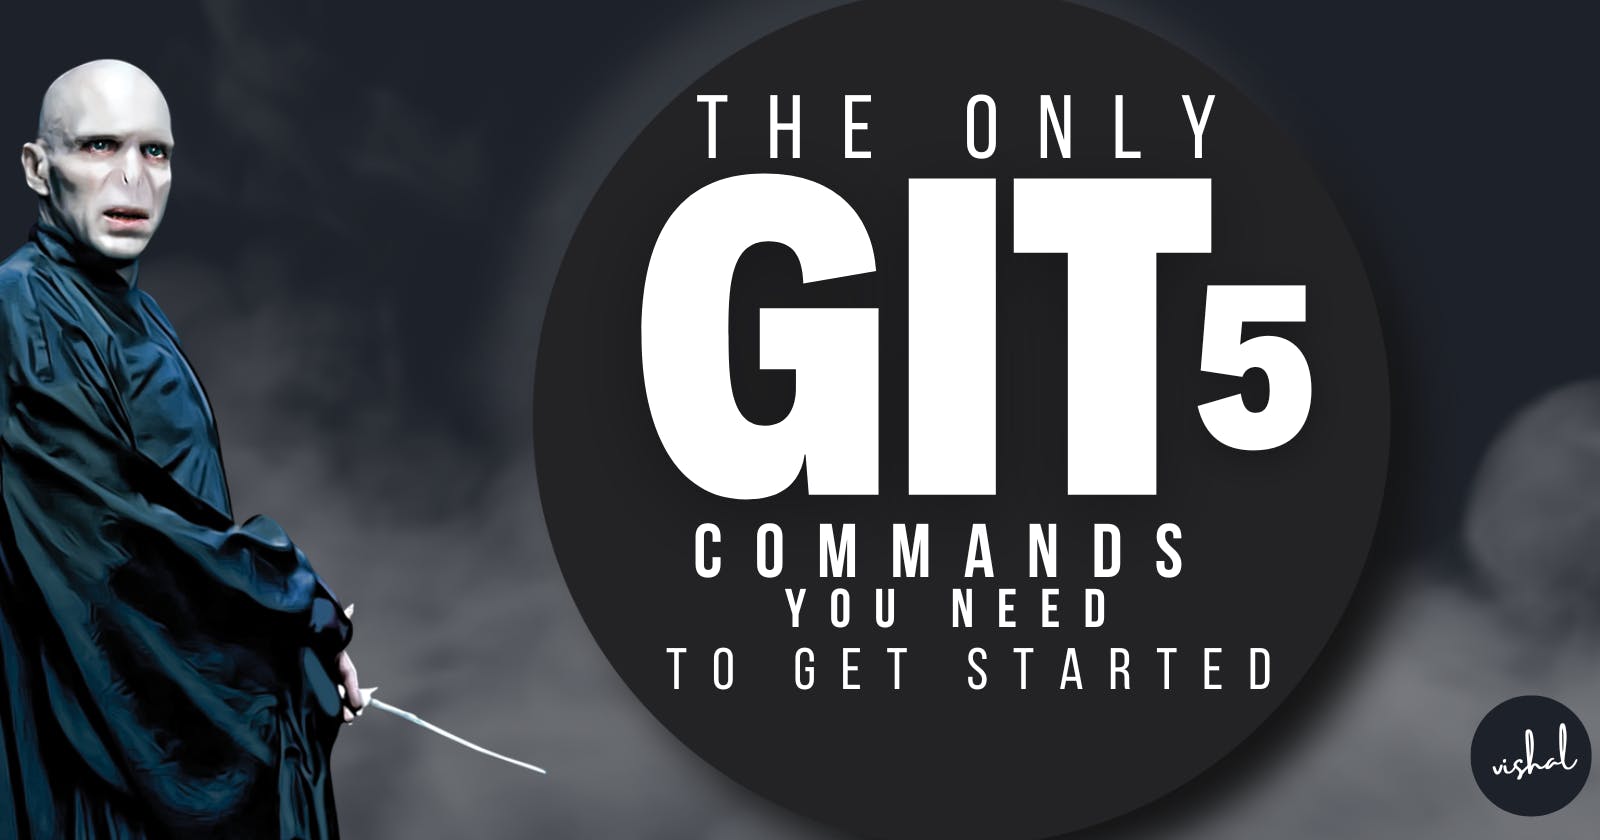 The only 5 git commands you need to get started